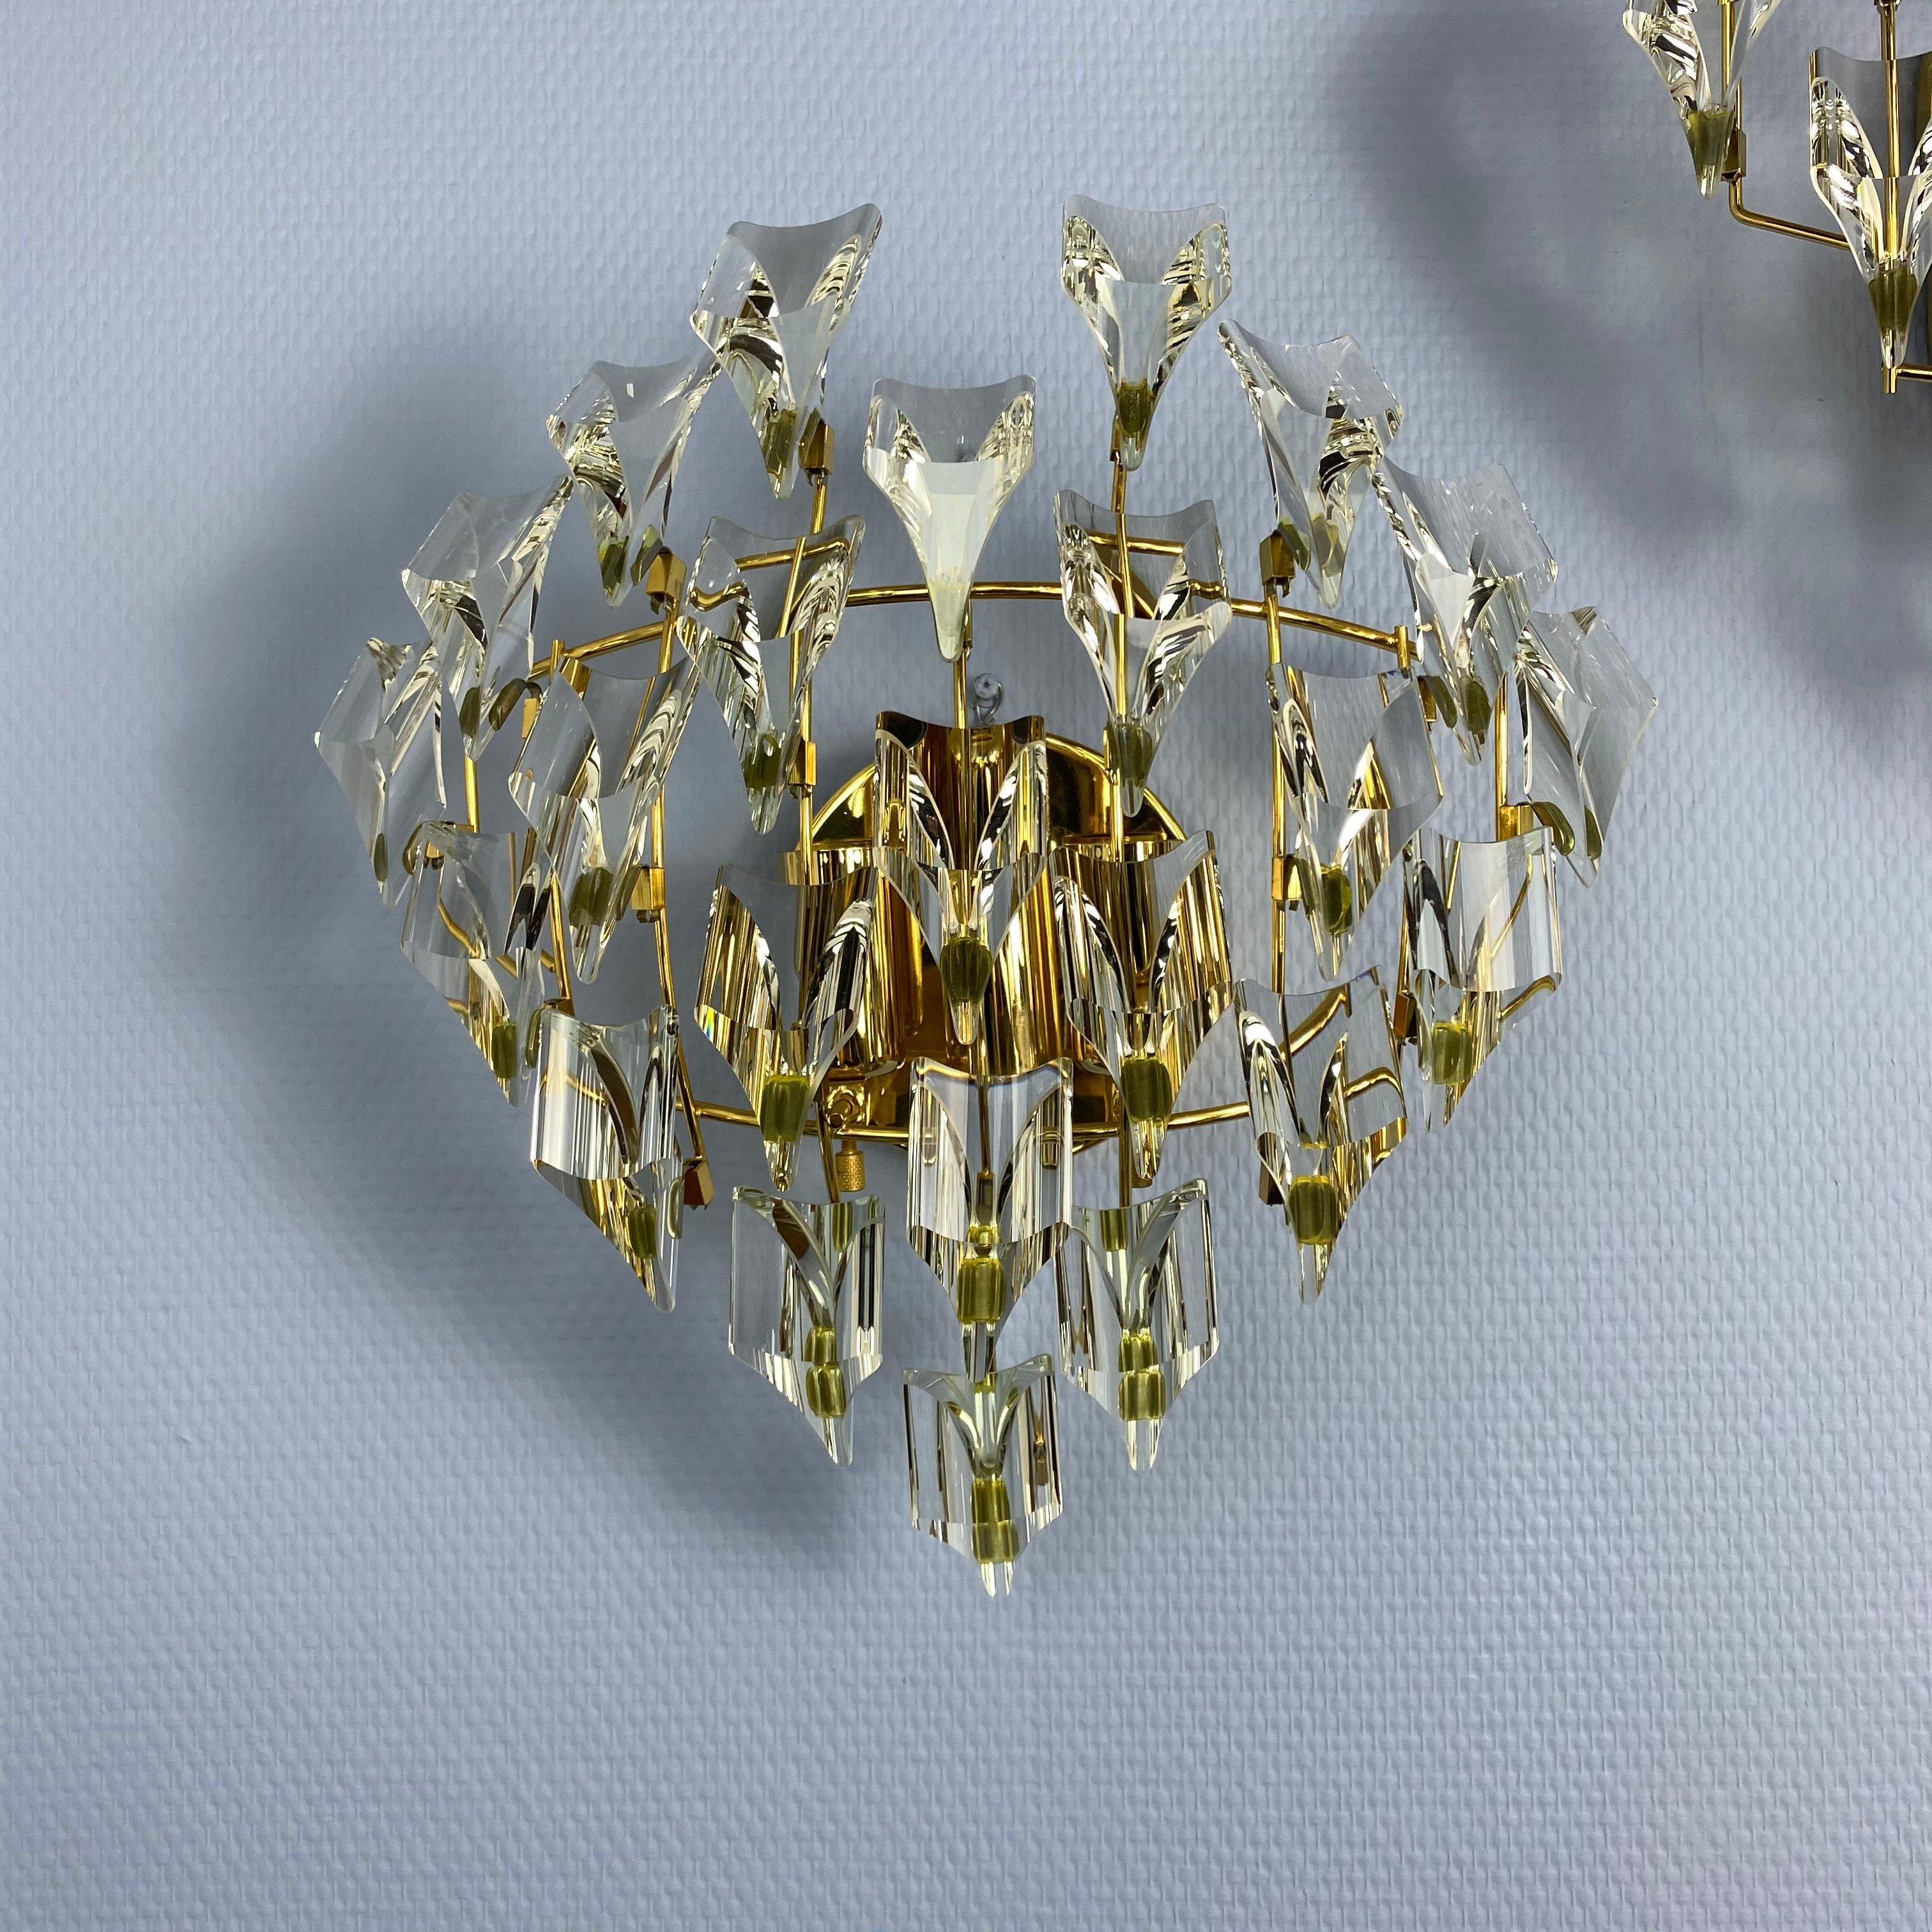 Crystal vintage wall sconces Christoph Palme.

Germany

Christoph Palme is one of the best light manufacturers in Europe!

Gilded brass.

High quality crystal!

Vintage.

1970s.

Size:

Height 13.8 inc (35 cm).

Width 11.8 inc (30 cm).

For three